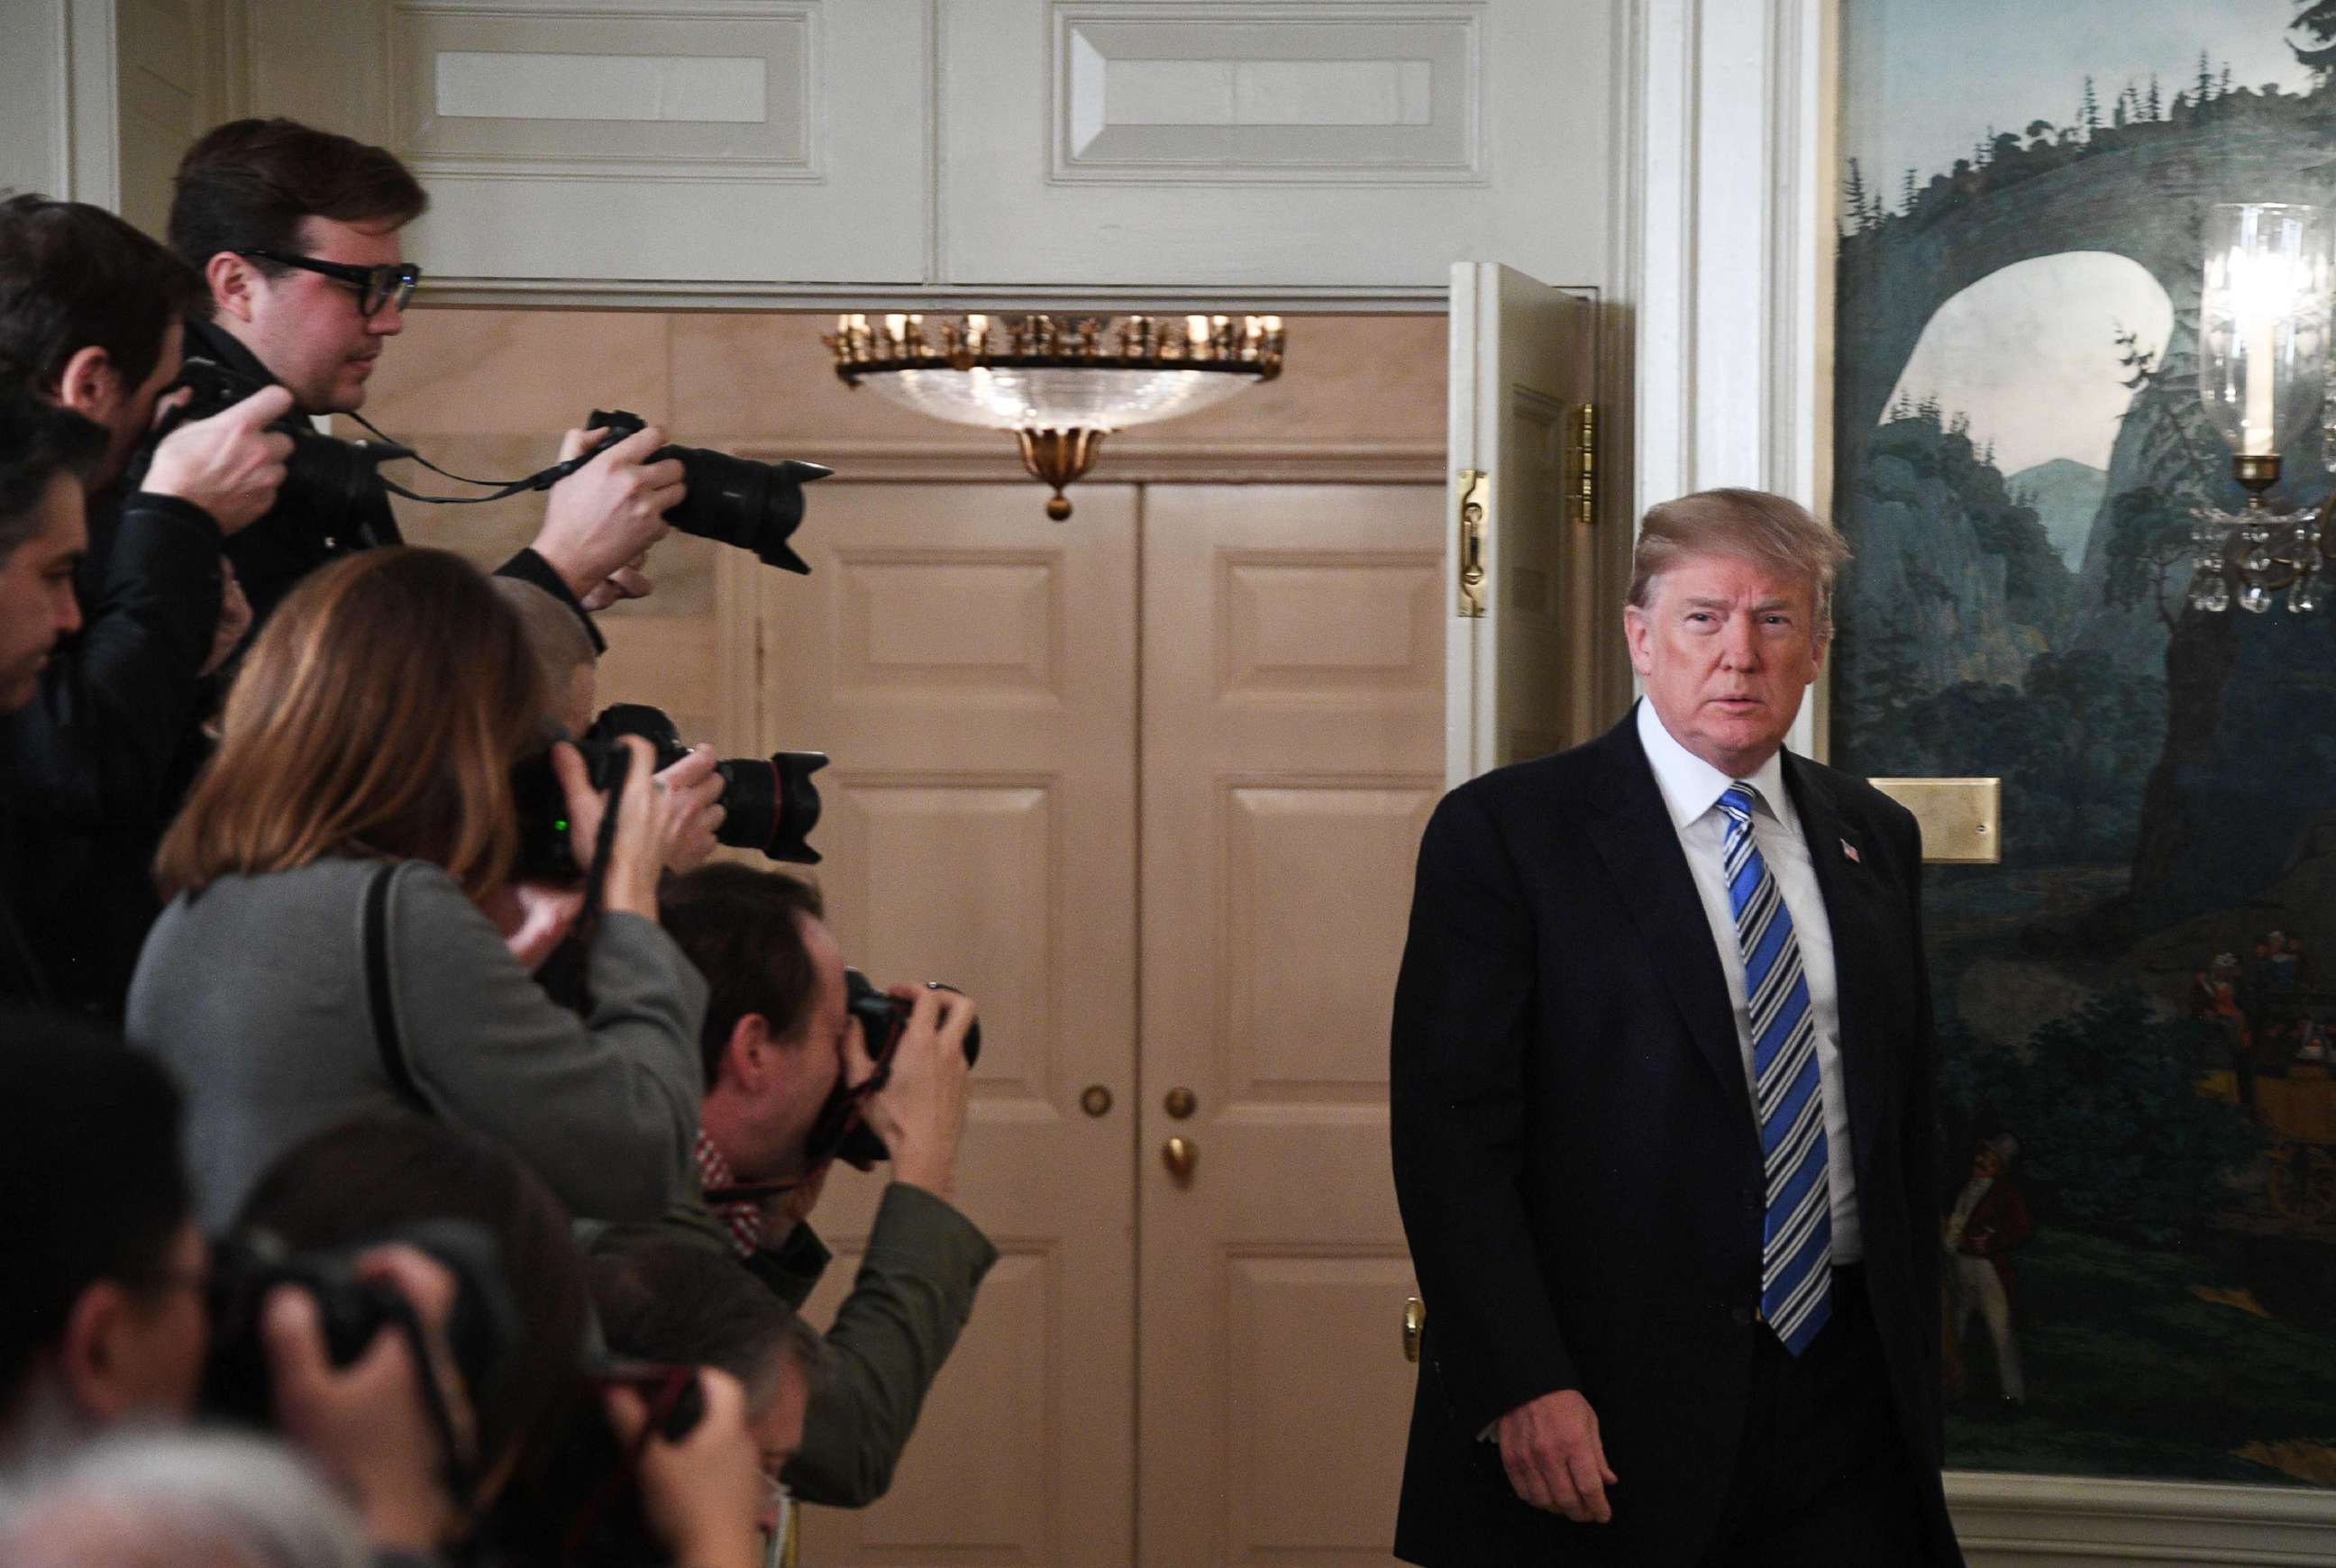 PHOTO: President Donald Trump arrives to speak on the Florida school shooting, in the Diplomatic Reception Room of the White House, Feb. 15, 2018 in Washington, D.C.